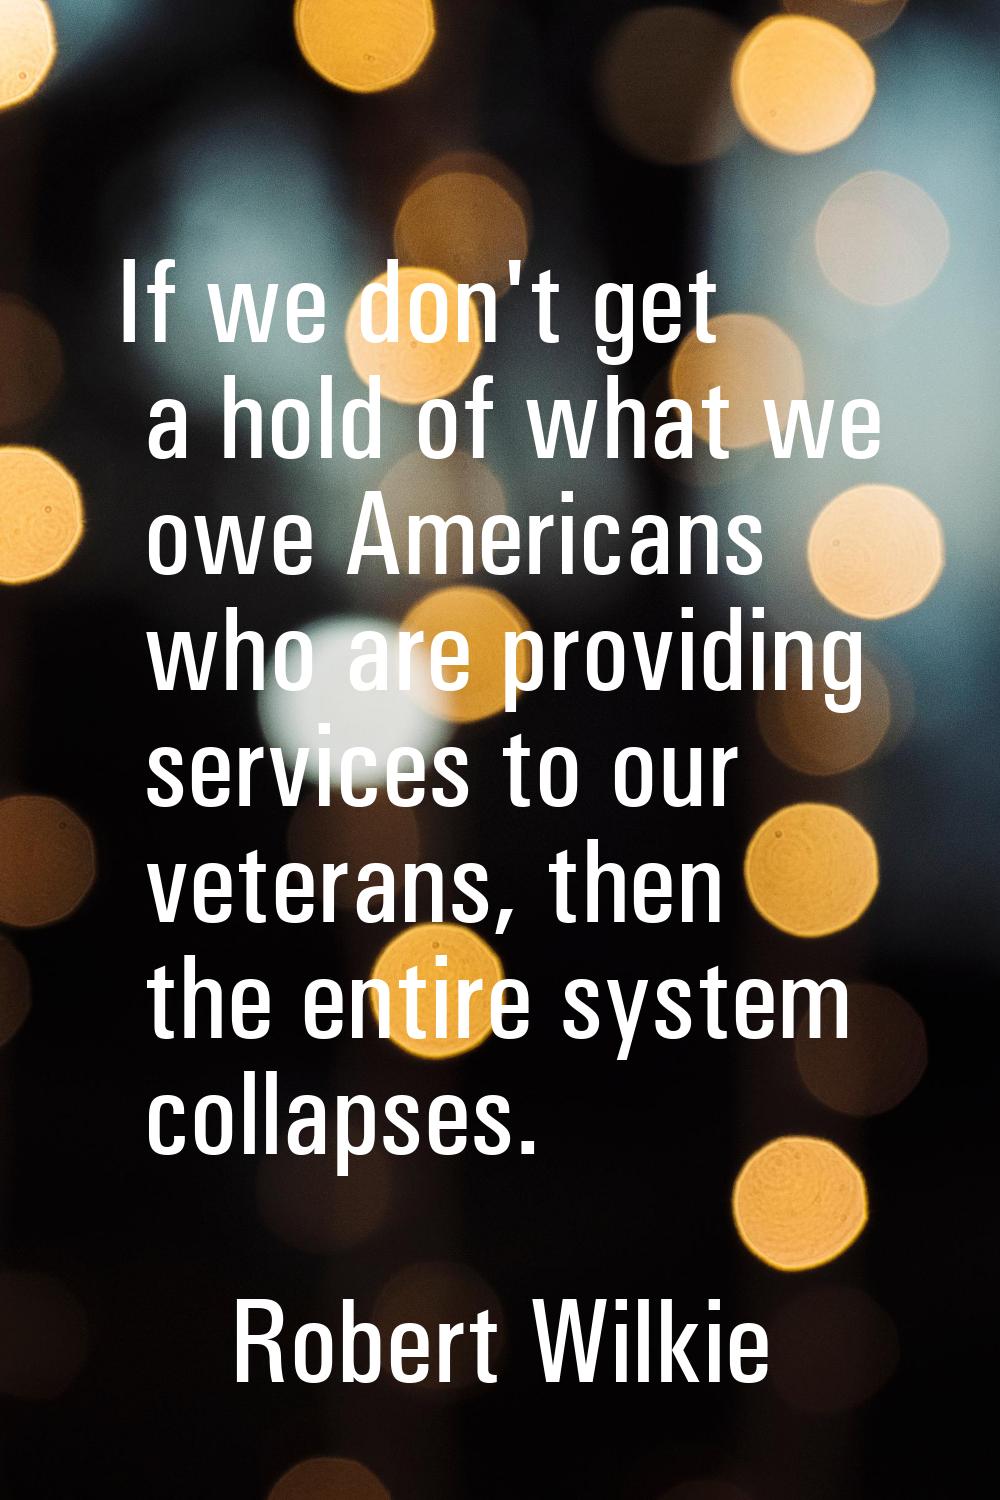 If we don't get a hold of what we owe Americans who are providing services to our veterans, then th